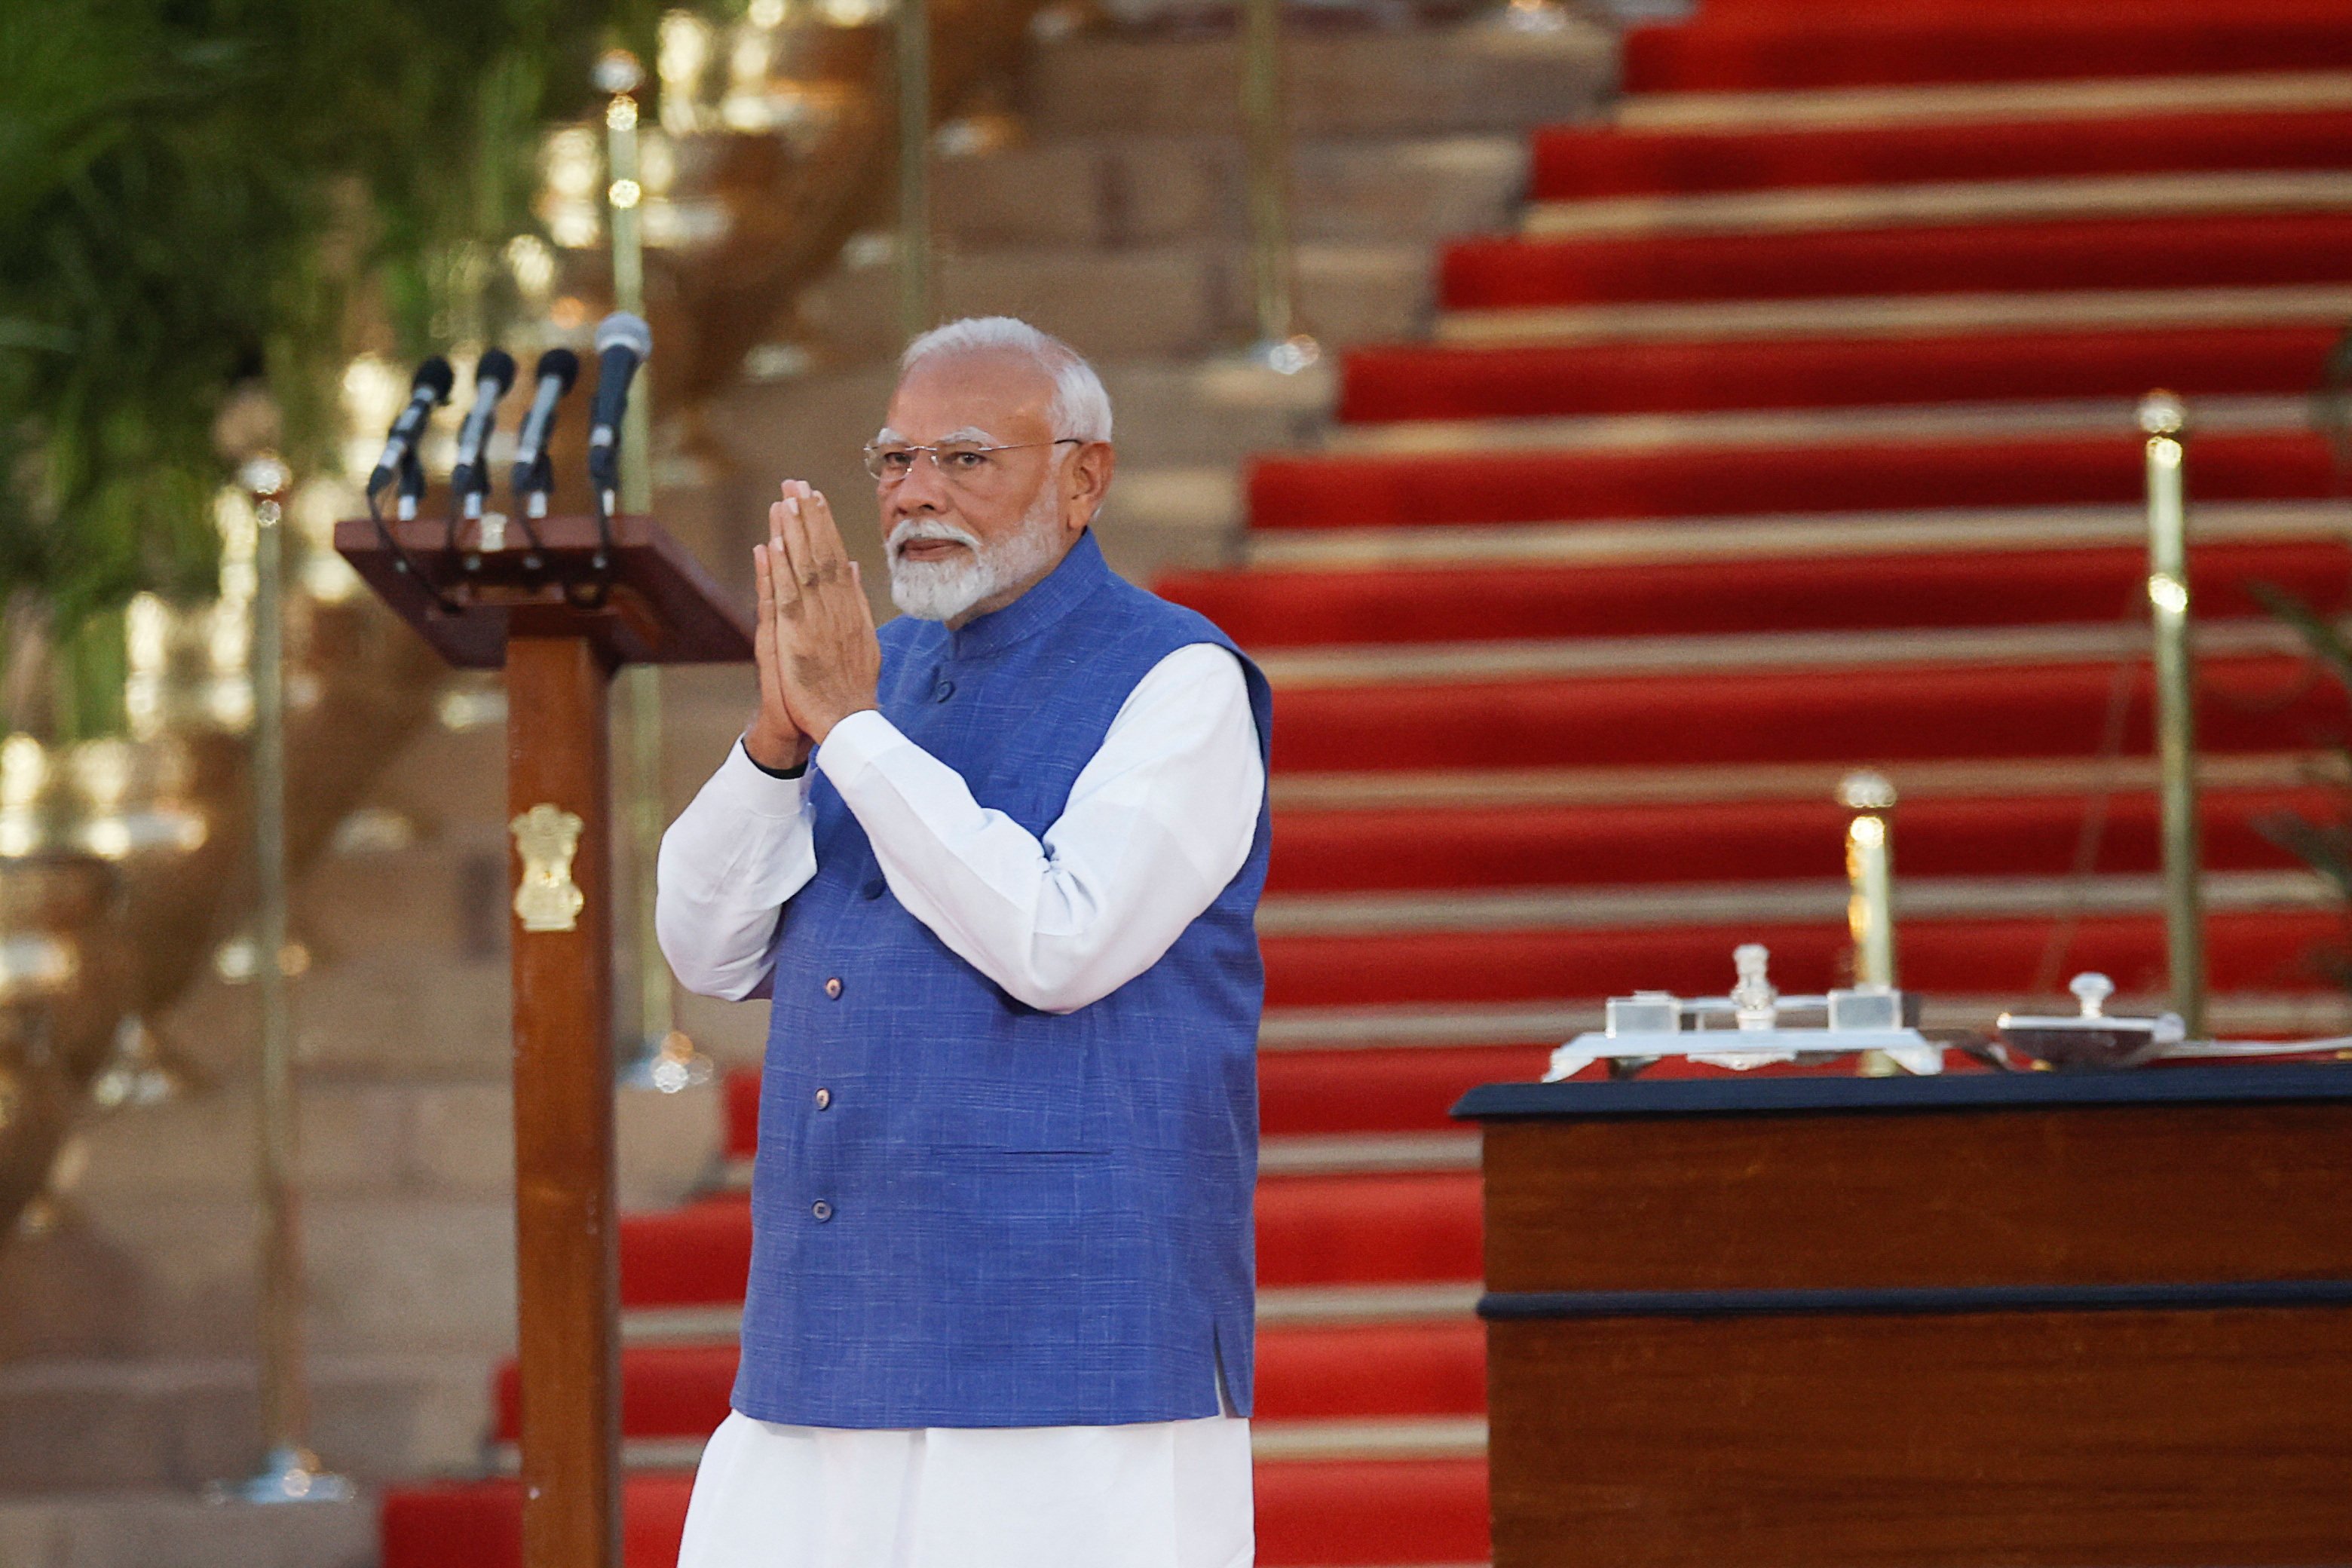 India’s Prime Minister Narendra Modi during a swearing-in ceremony at the presidential palace in New Delhi, India, on June 9. Photo: Reuters